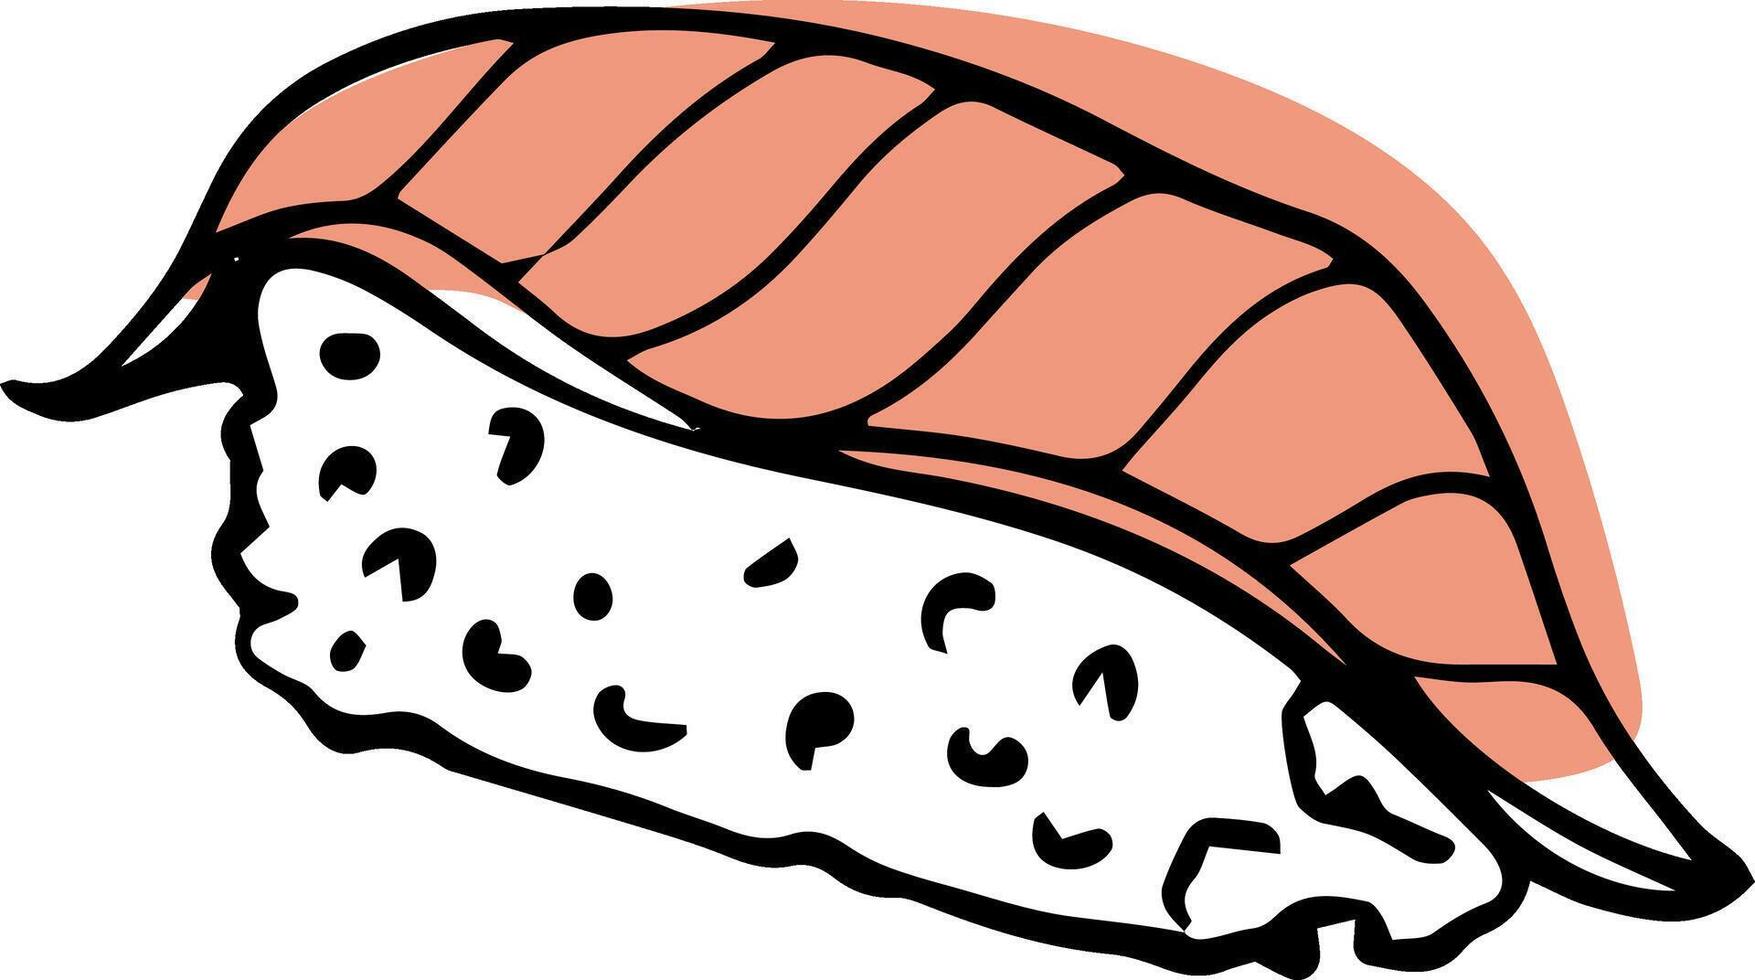 Single salmon sushi nigiri hand drawn doodle style side view isolated on white background vector